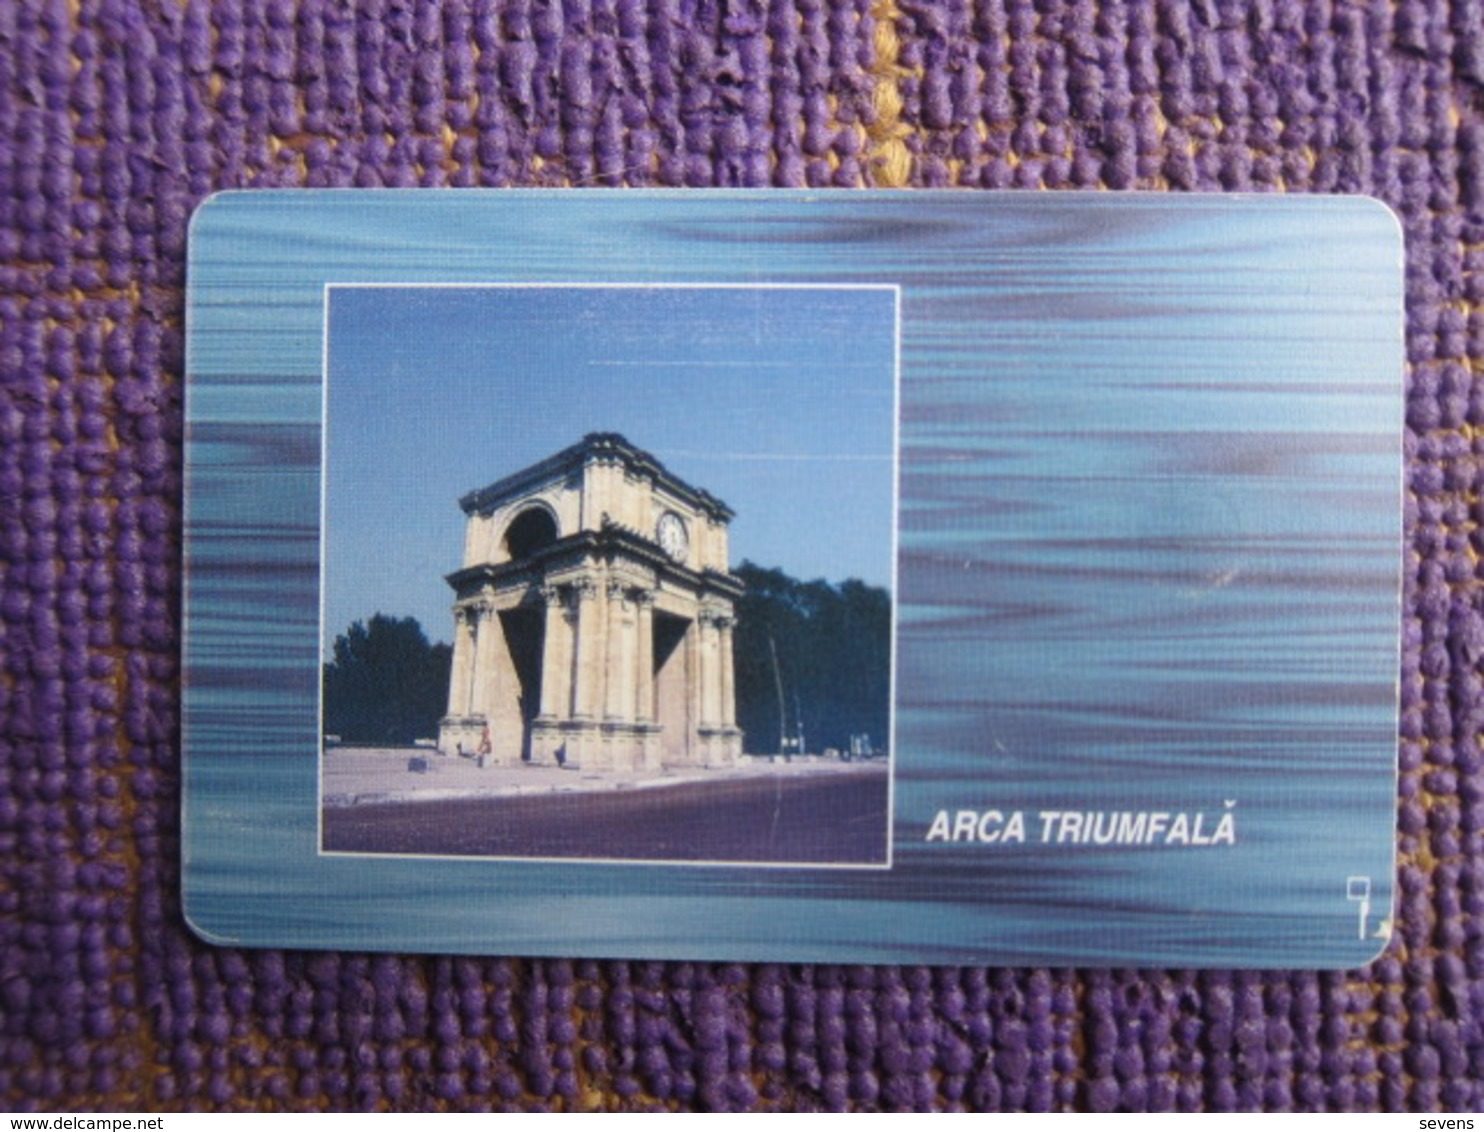 The First Issued Chip Phonecard,Flag And Arca Triumfala,used With Tiny Scratch - Moldova